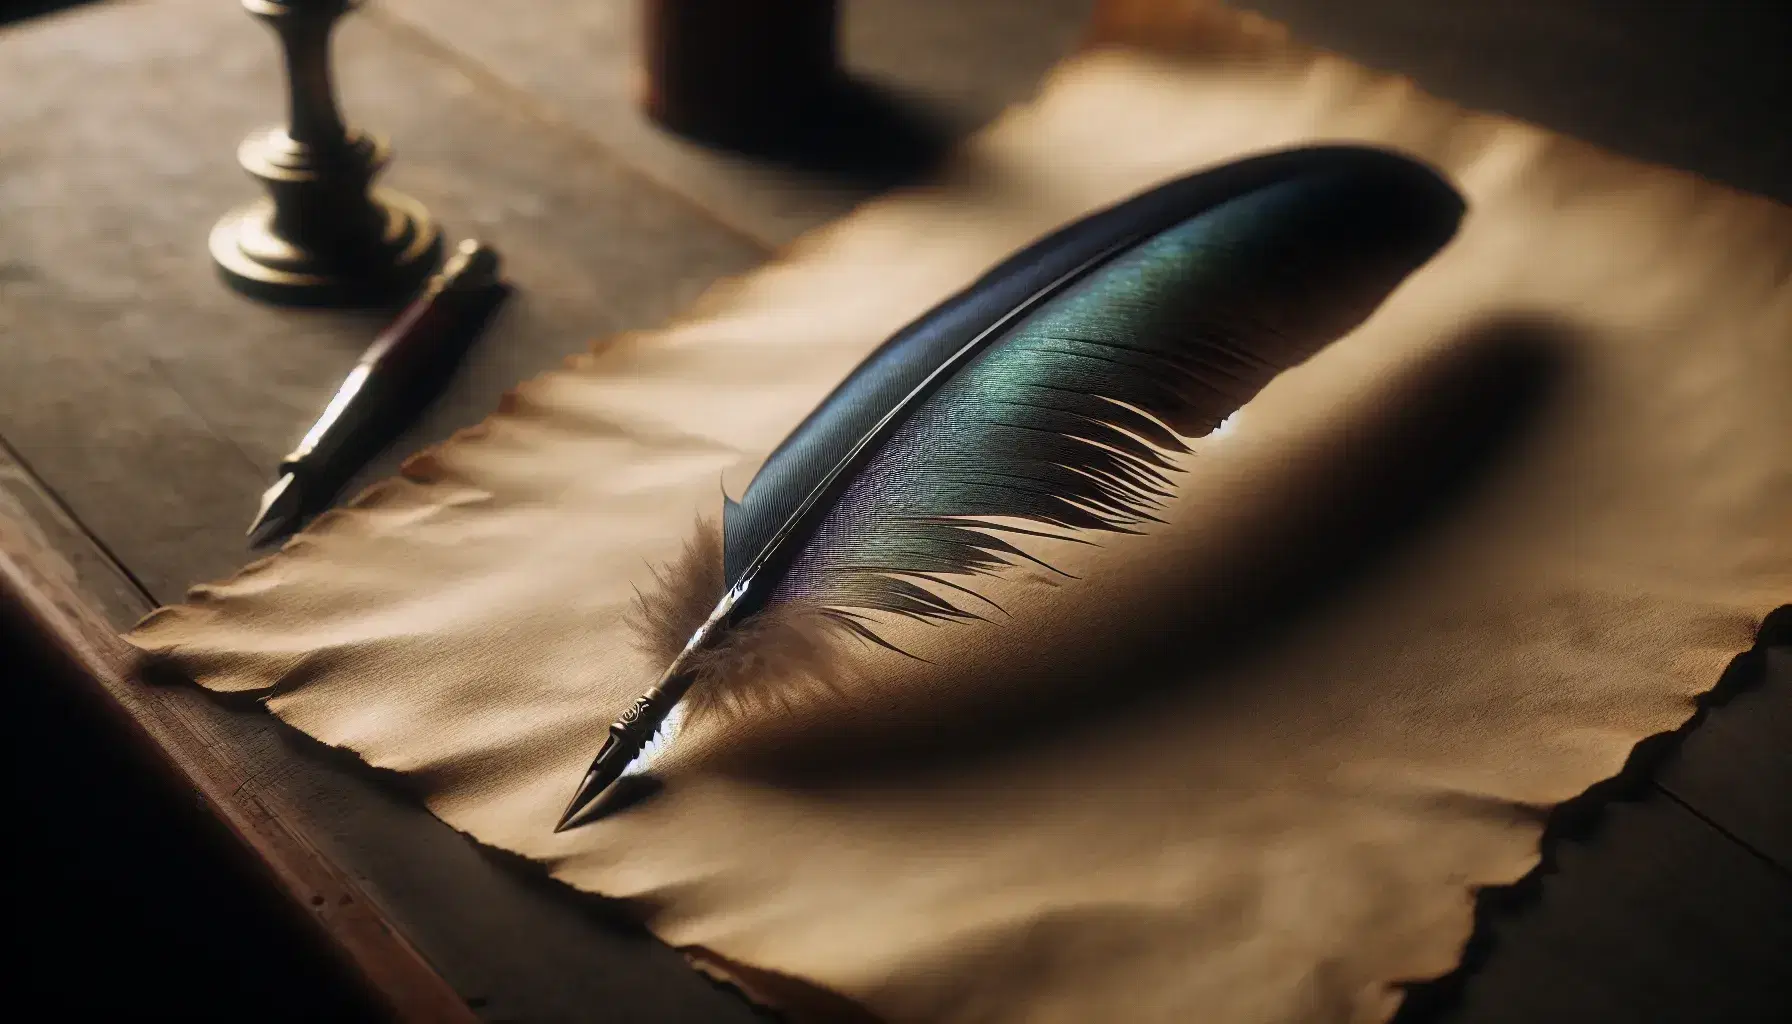 Sharpened quill pen on ancient parchment, iridescent blue-green shades, on wooden desk with blurred brass candlestick.